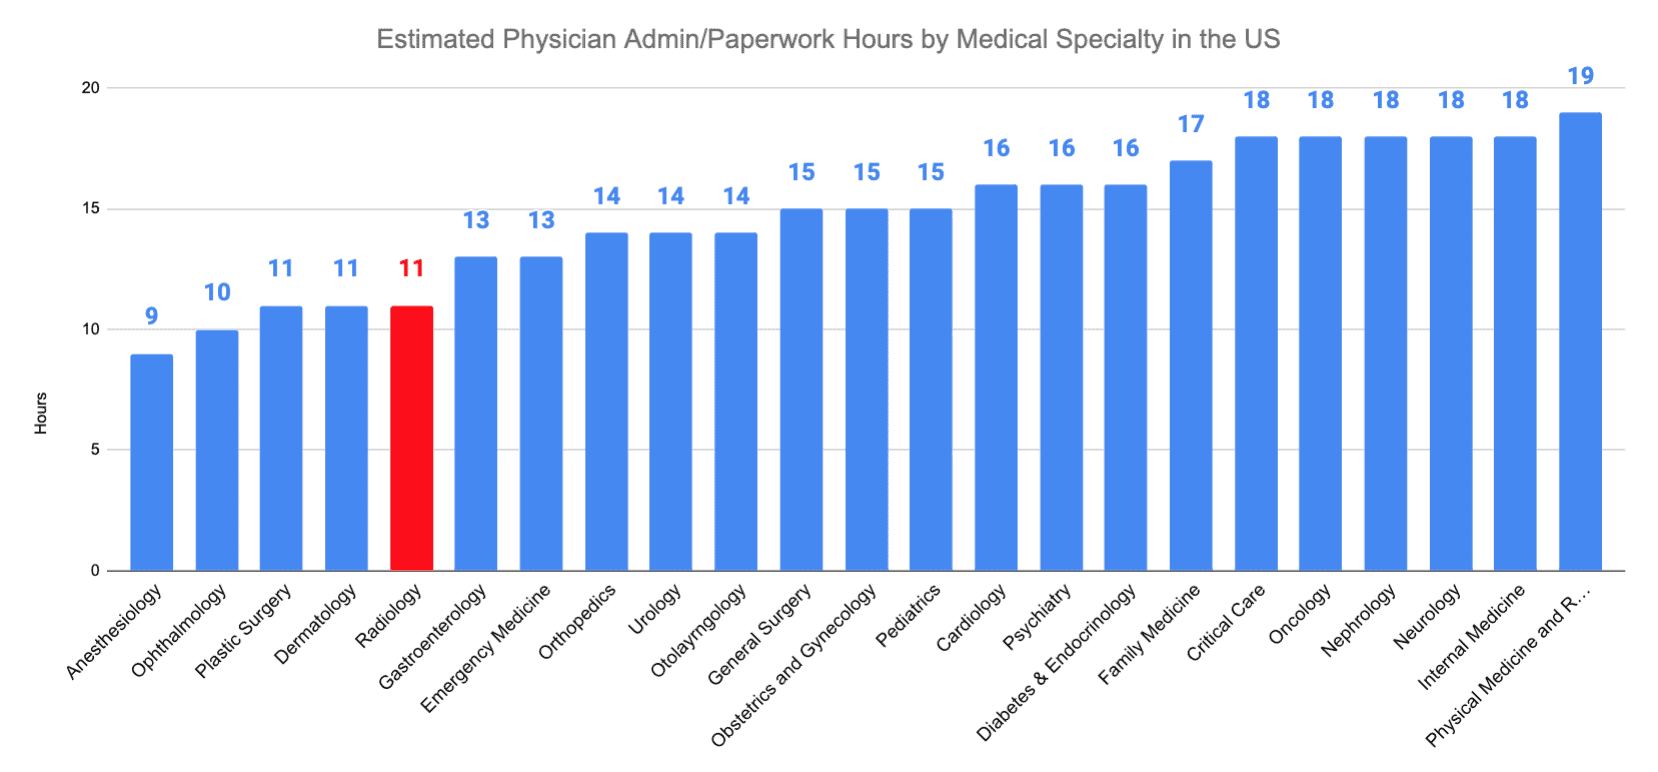 Radiology vs. Allergy and Immunology Estimated Physician Admin/Paperwork Hours by Medical Specialty in the US